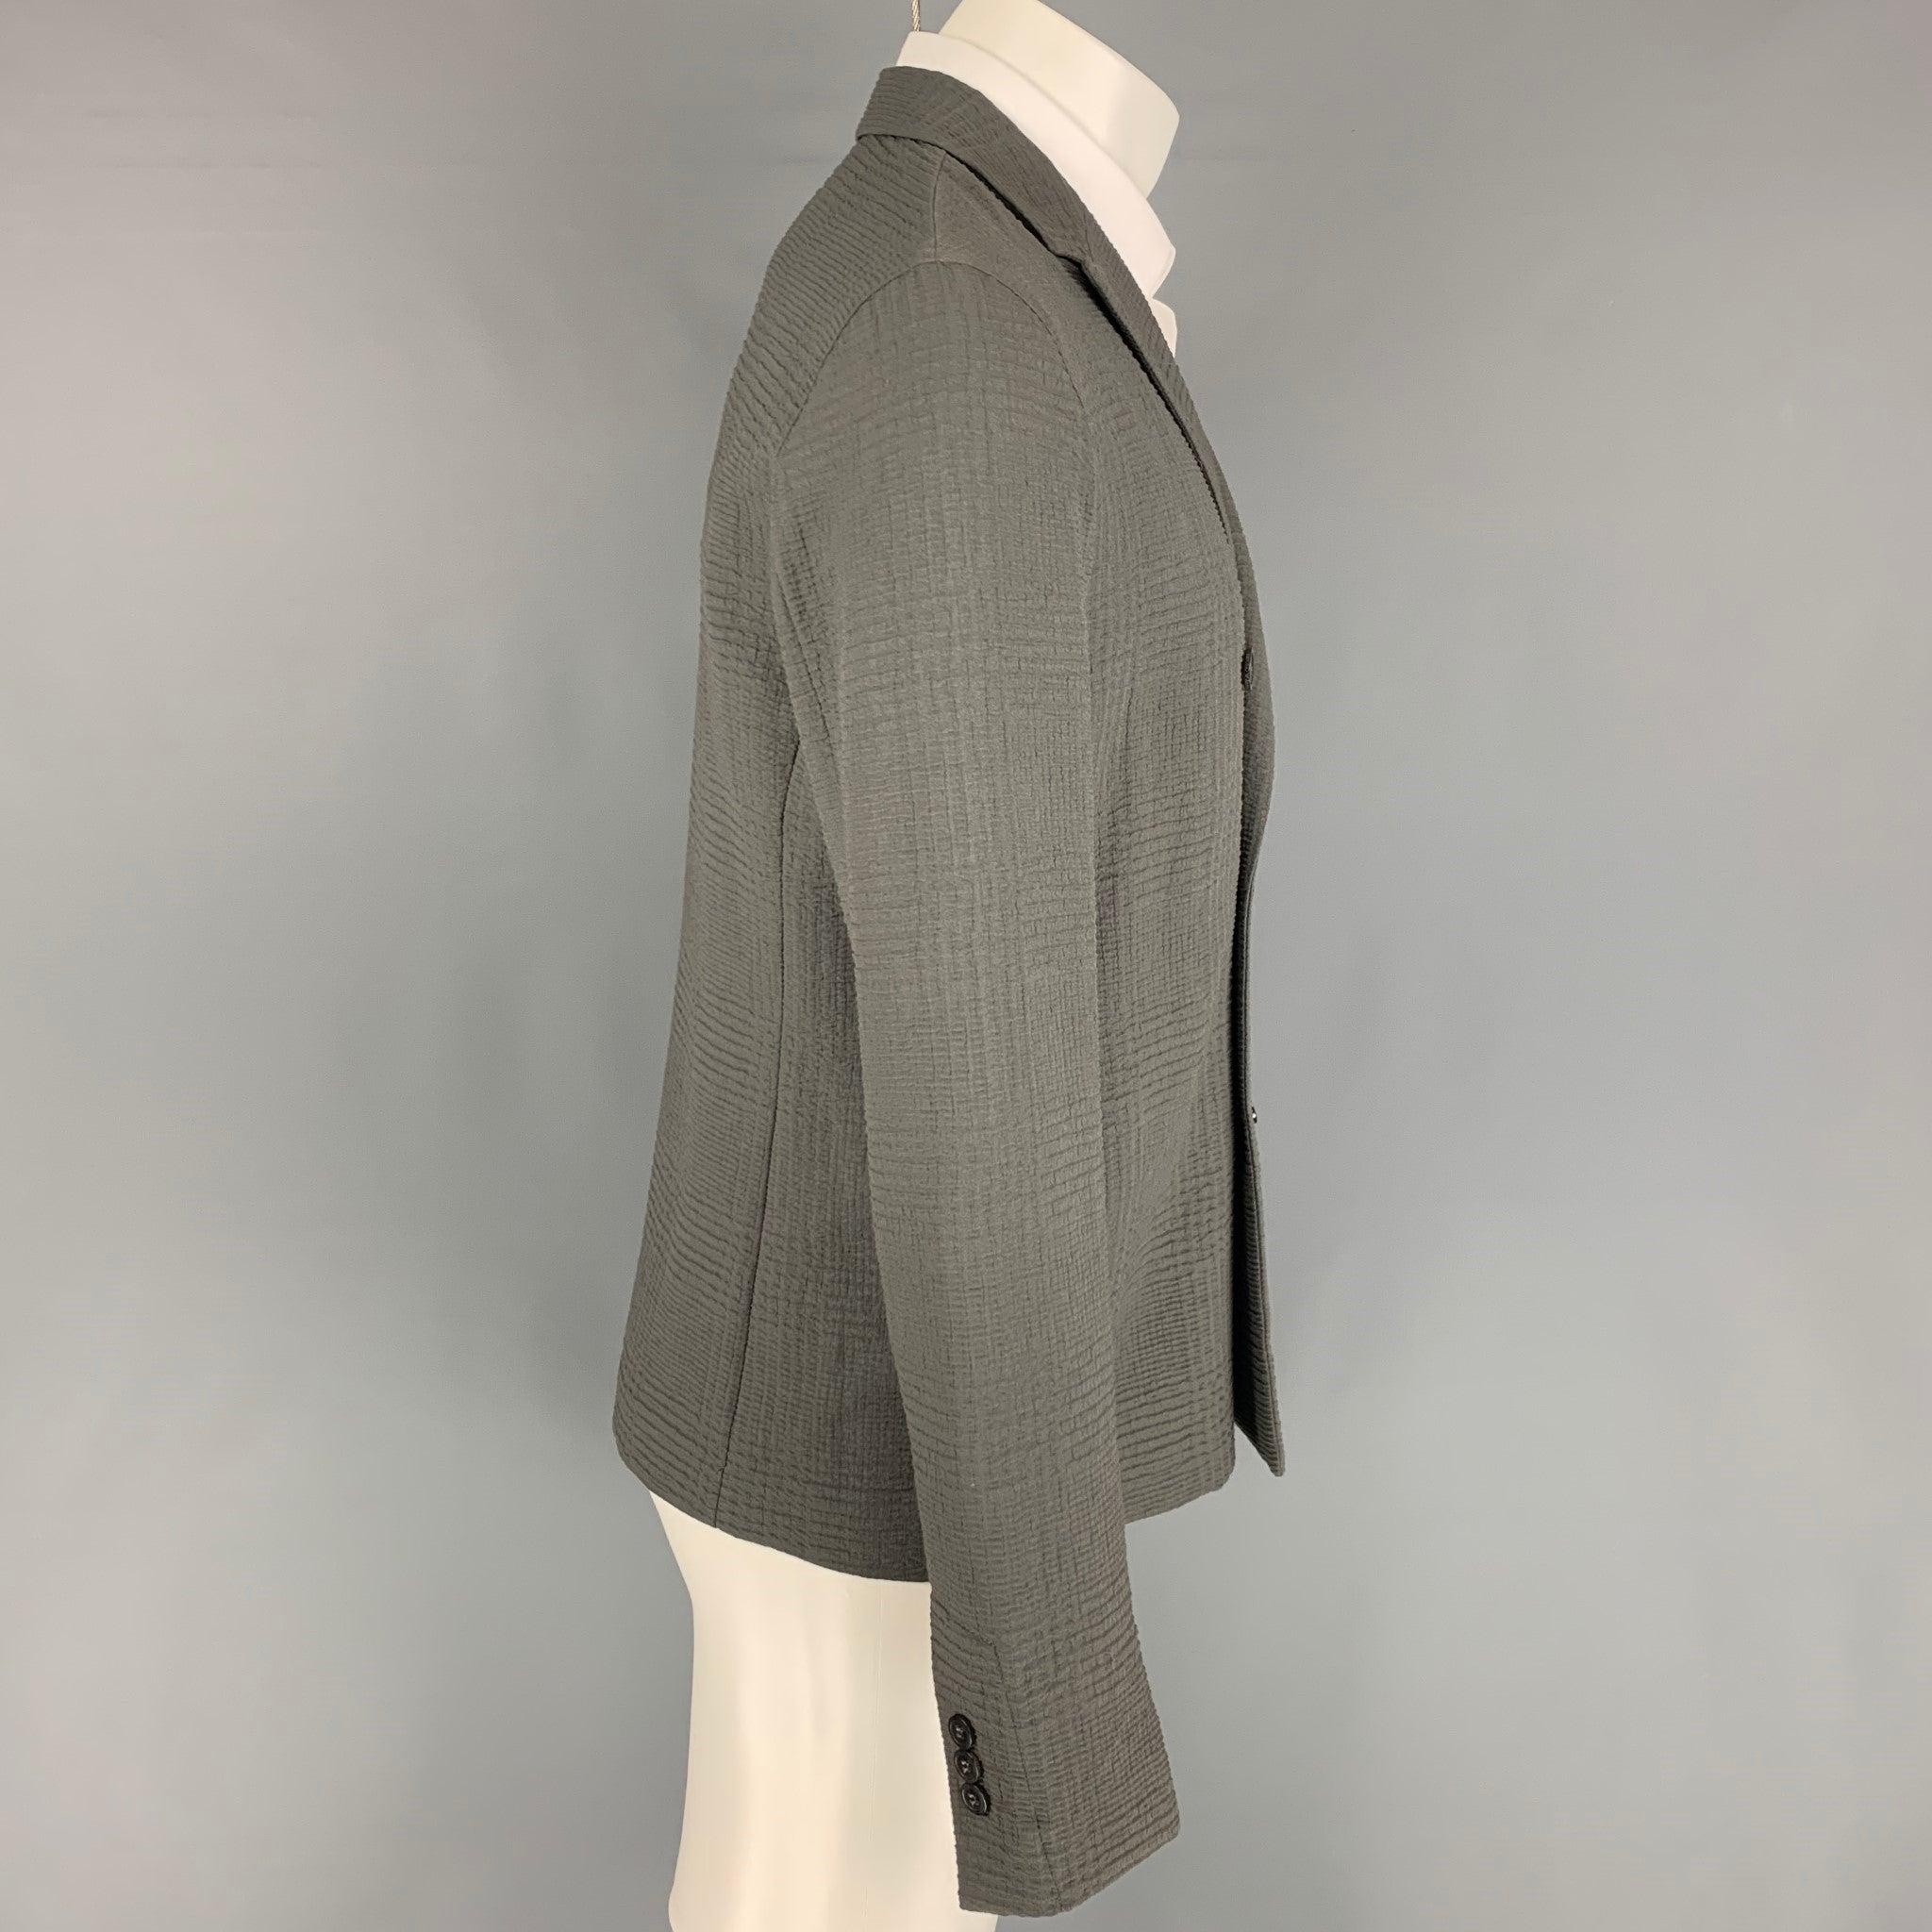 EMPORIO ARMANI sport coat comes in a slate textured material featuring a peak lapel, slit pockets, and a double breasted closure. Made in Italy.
Very Good
Pre-Owned Condition. Fabric tag removed.  

Marked:   Size tag removed.  

Measurements: 
